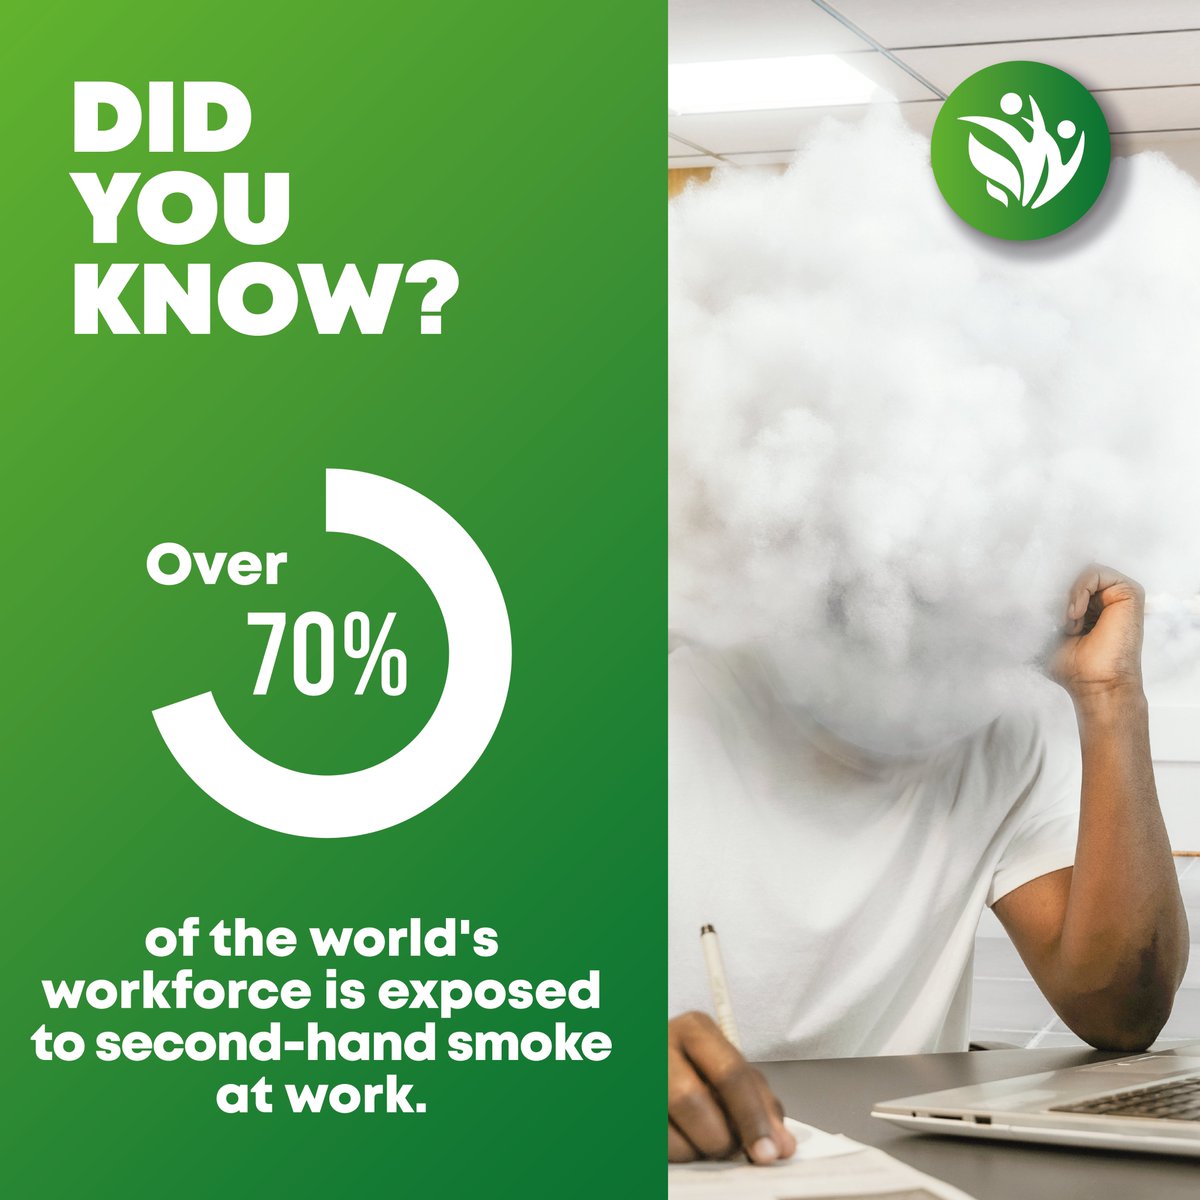 Join our smoking cessation program in promoting a healthier workplace!

Contact Us today or Visit our website through the link on our Bio to learn more about our wellness services.

We enable Healthier and Happier Employees!

#BloomWellnessTanzania #WellnessPrograms #Heath